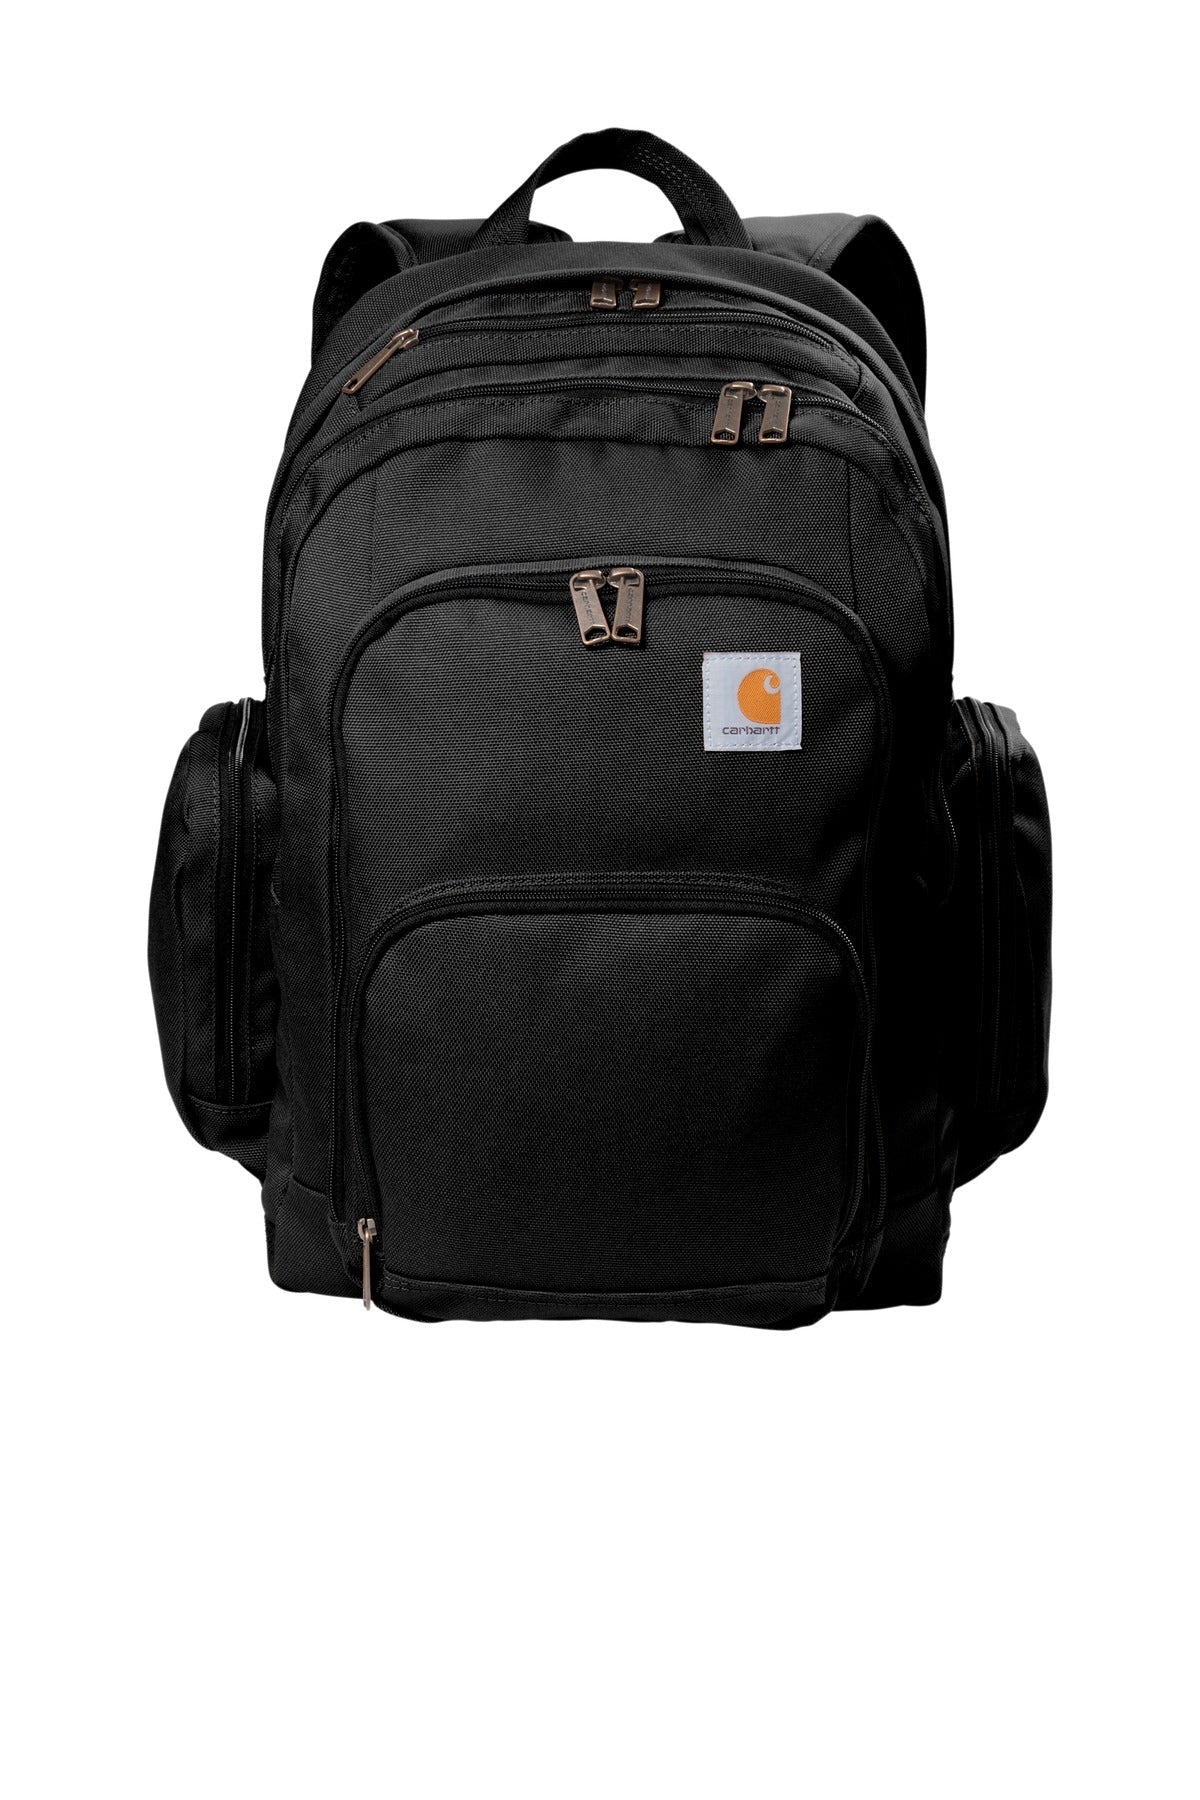 Carhartt ® Foundry Series Pro Backpack. CT89176508 - DFW Impression